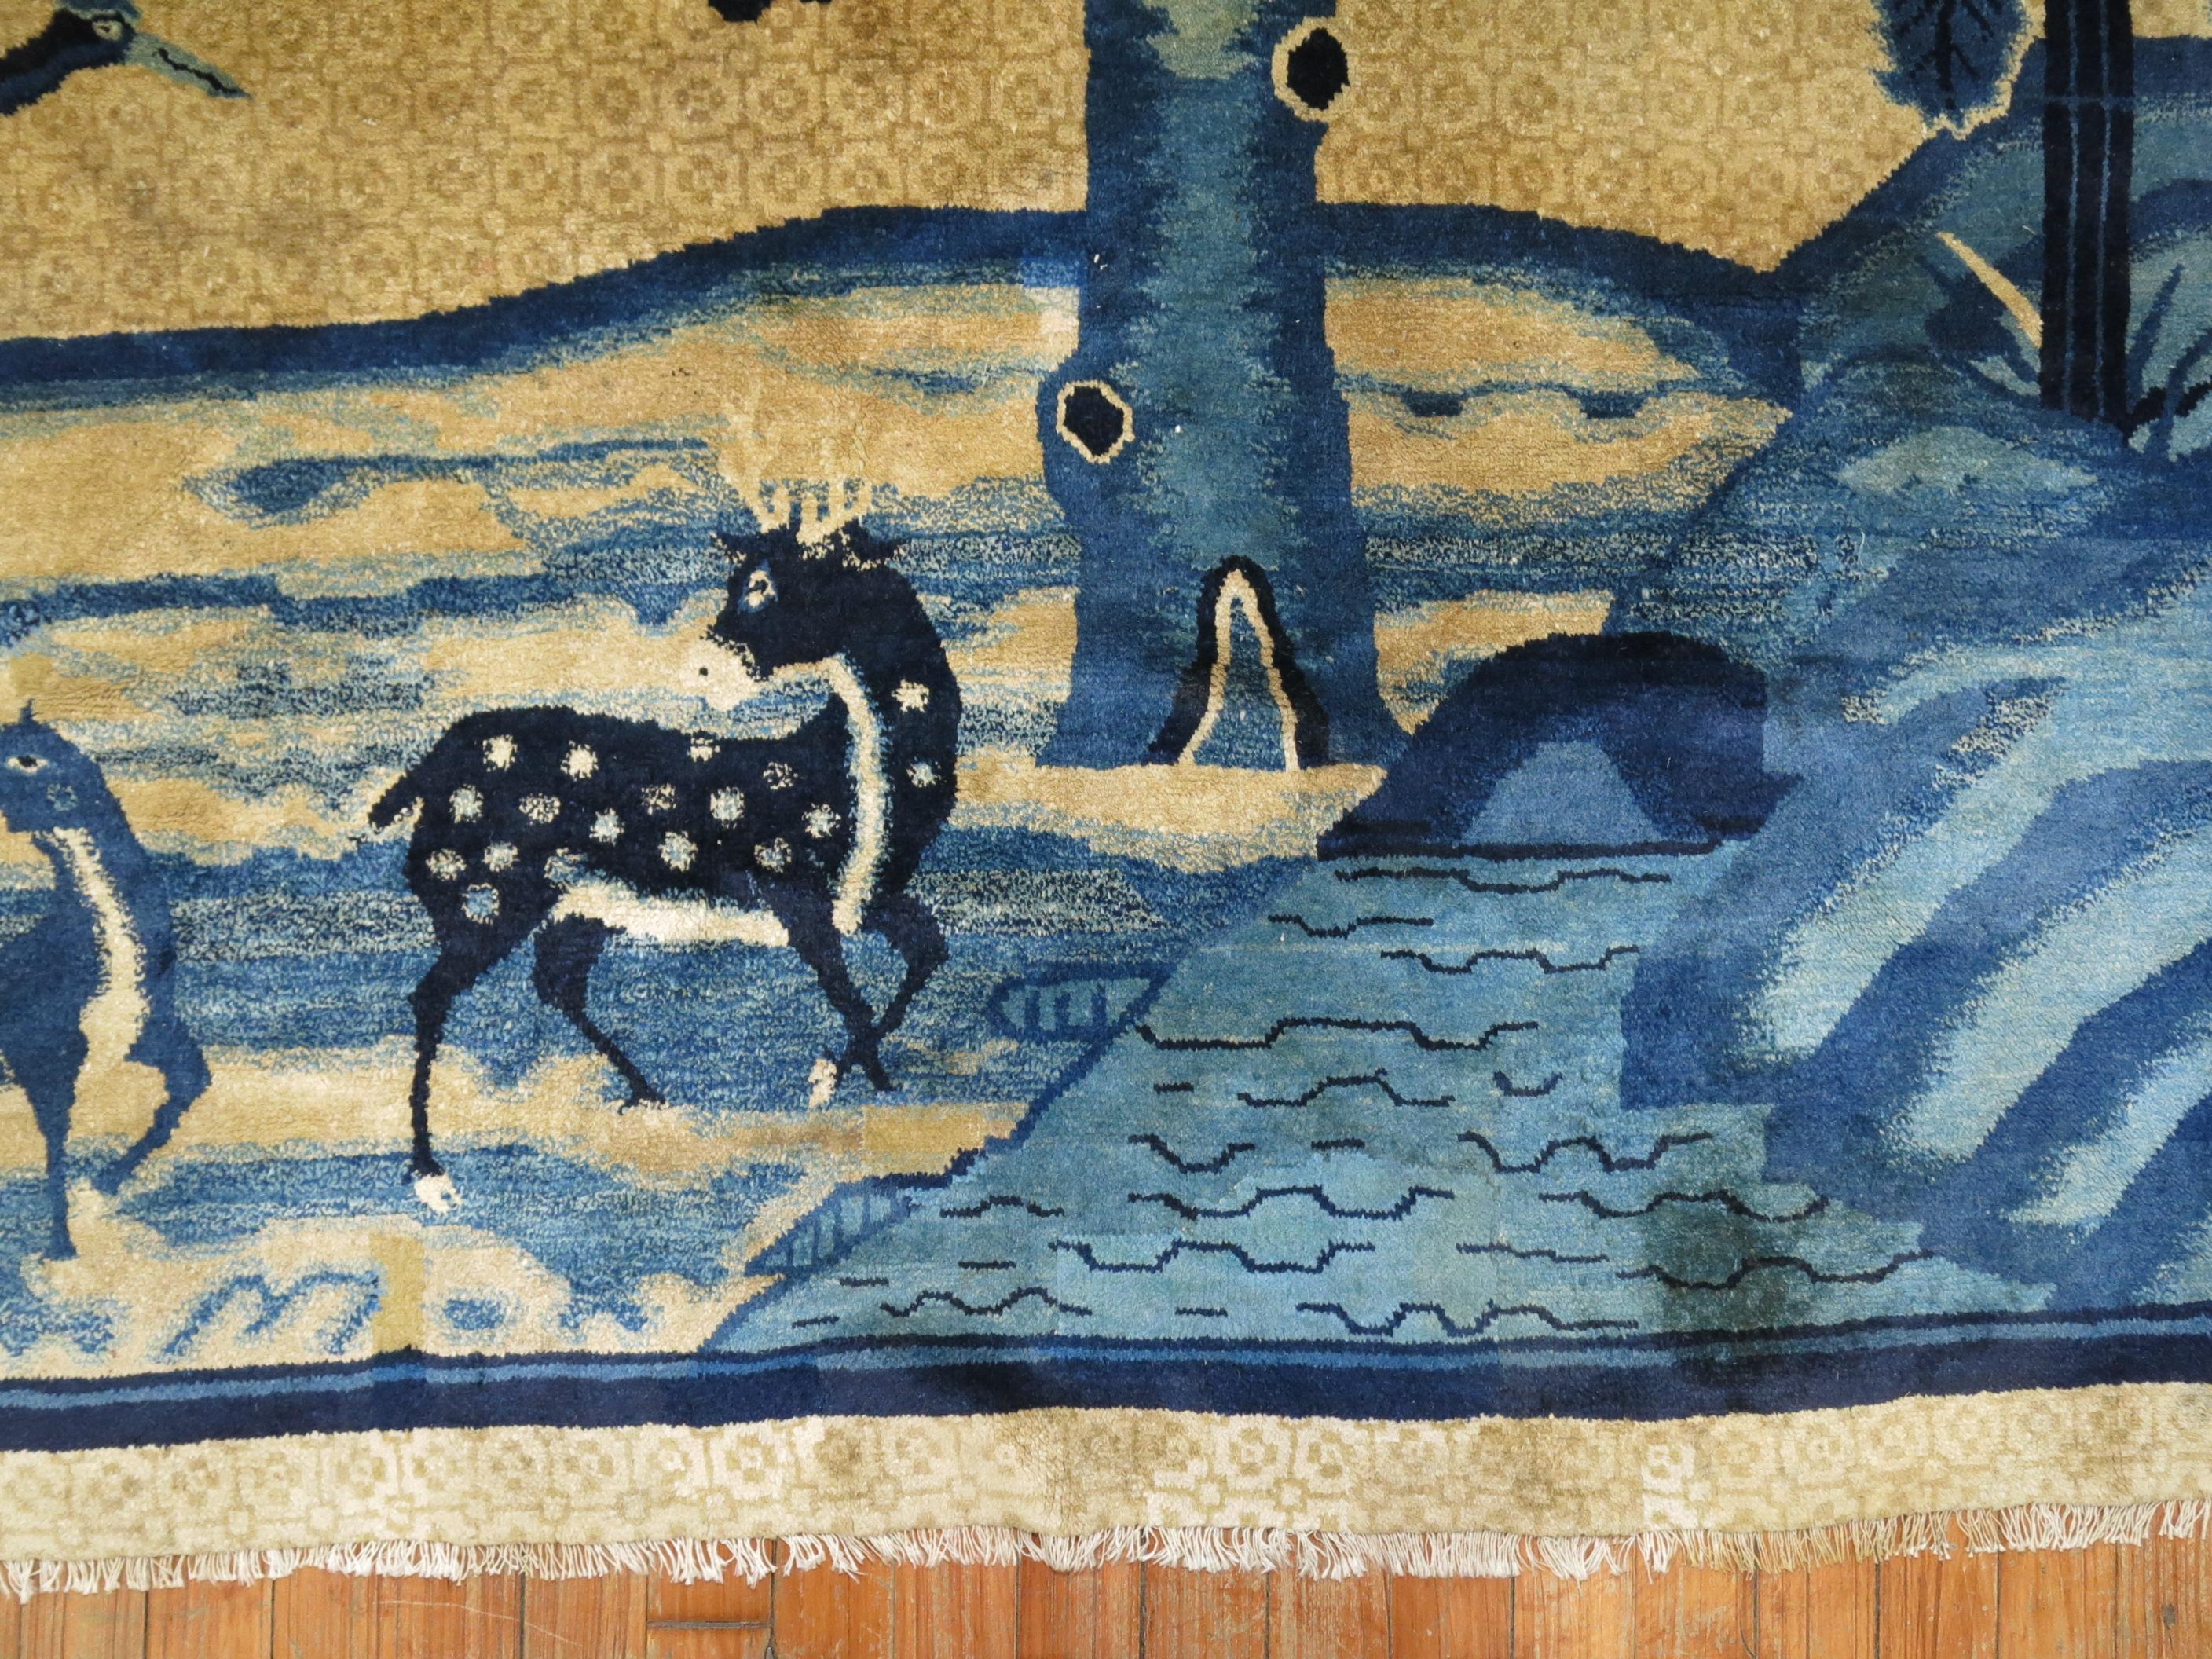 Hand-Woven Blue Tan Chinese Animal Pictorial Landscape Rug For Sale